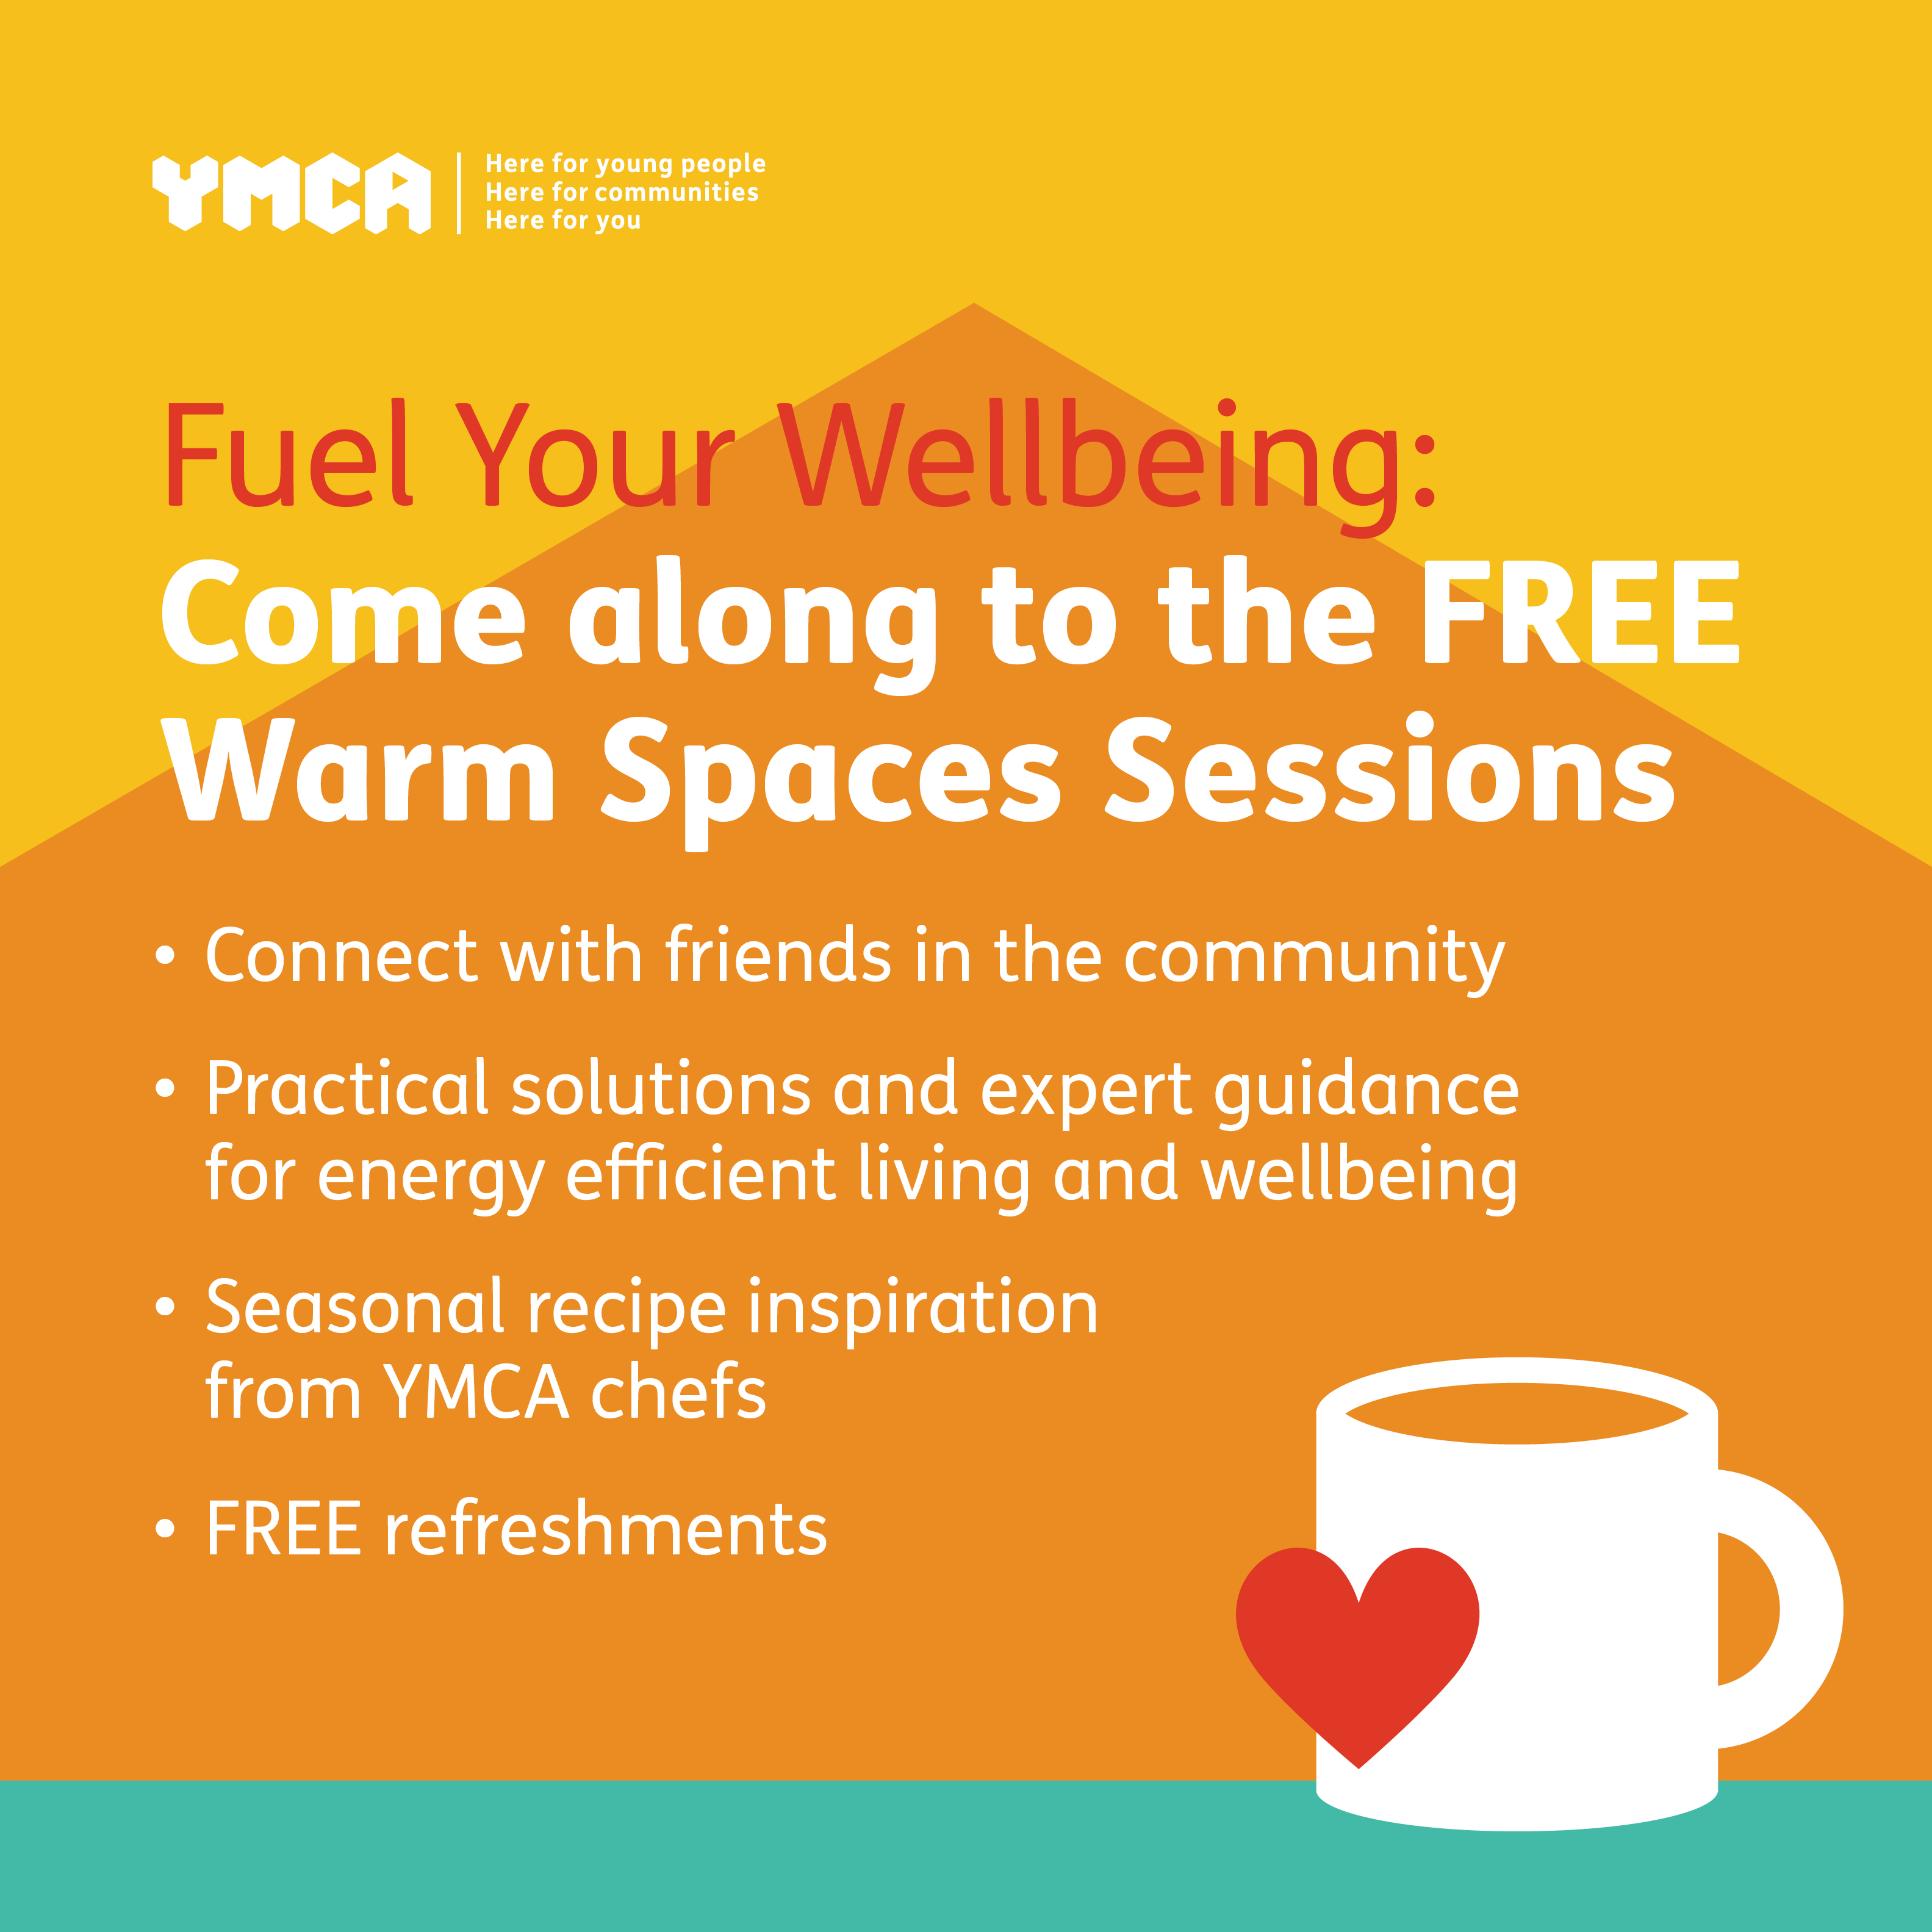 FREE Warm Spaces Sessions